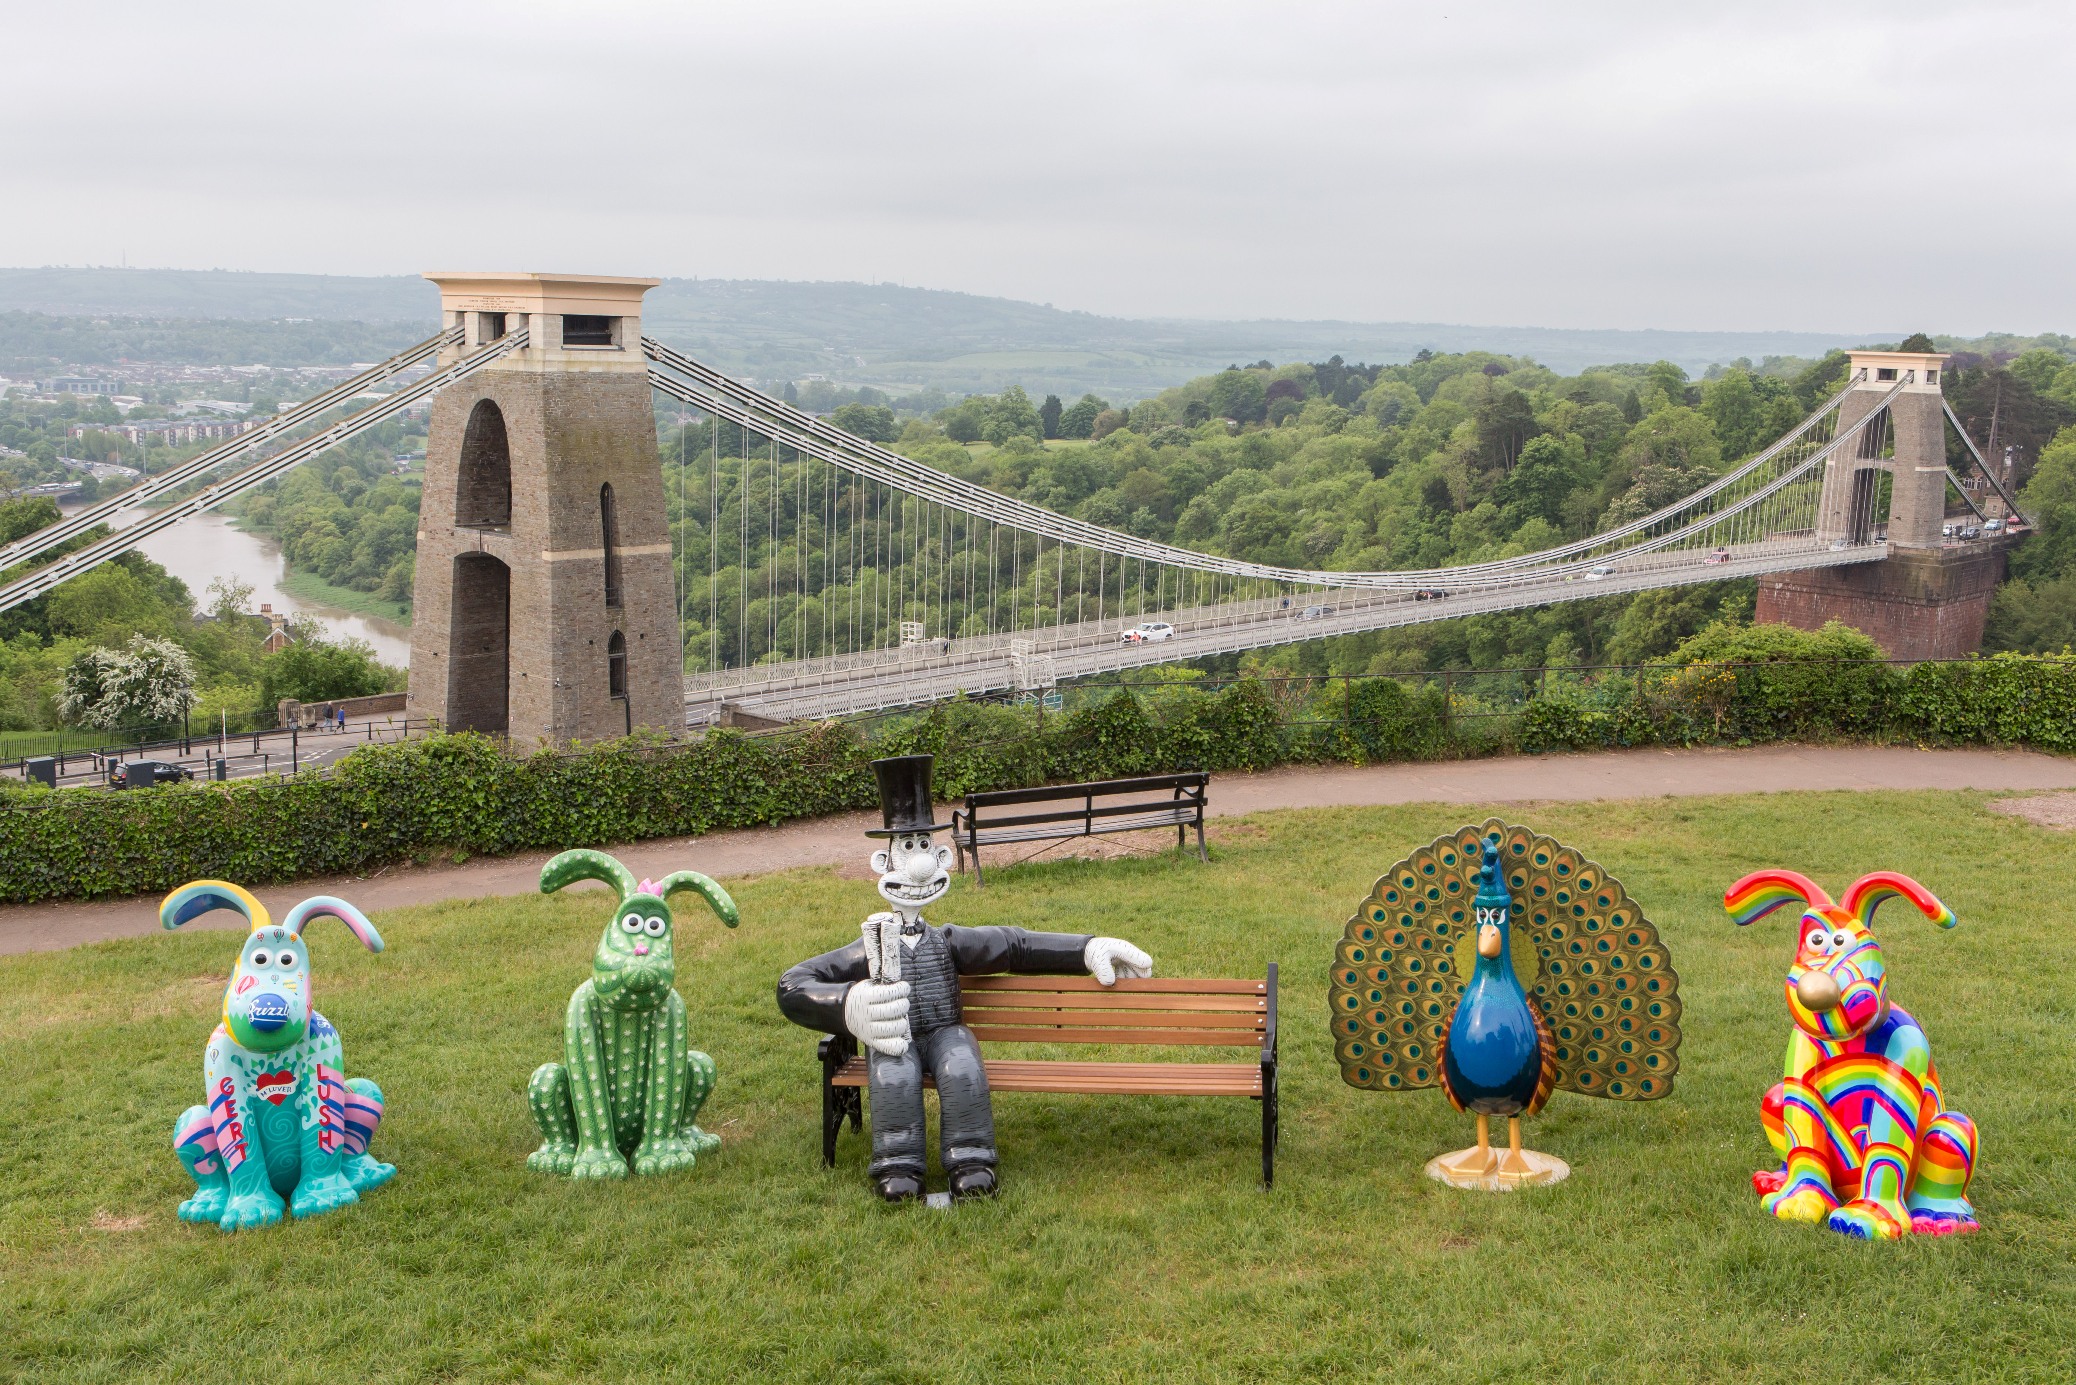 Total Guide to Bristol's Gromit Unleashed 2 Trail